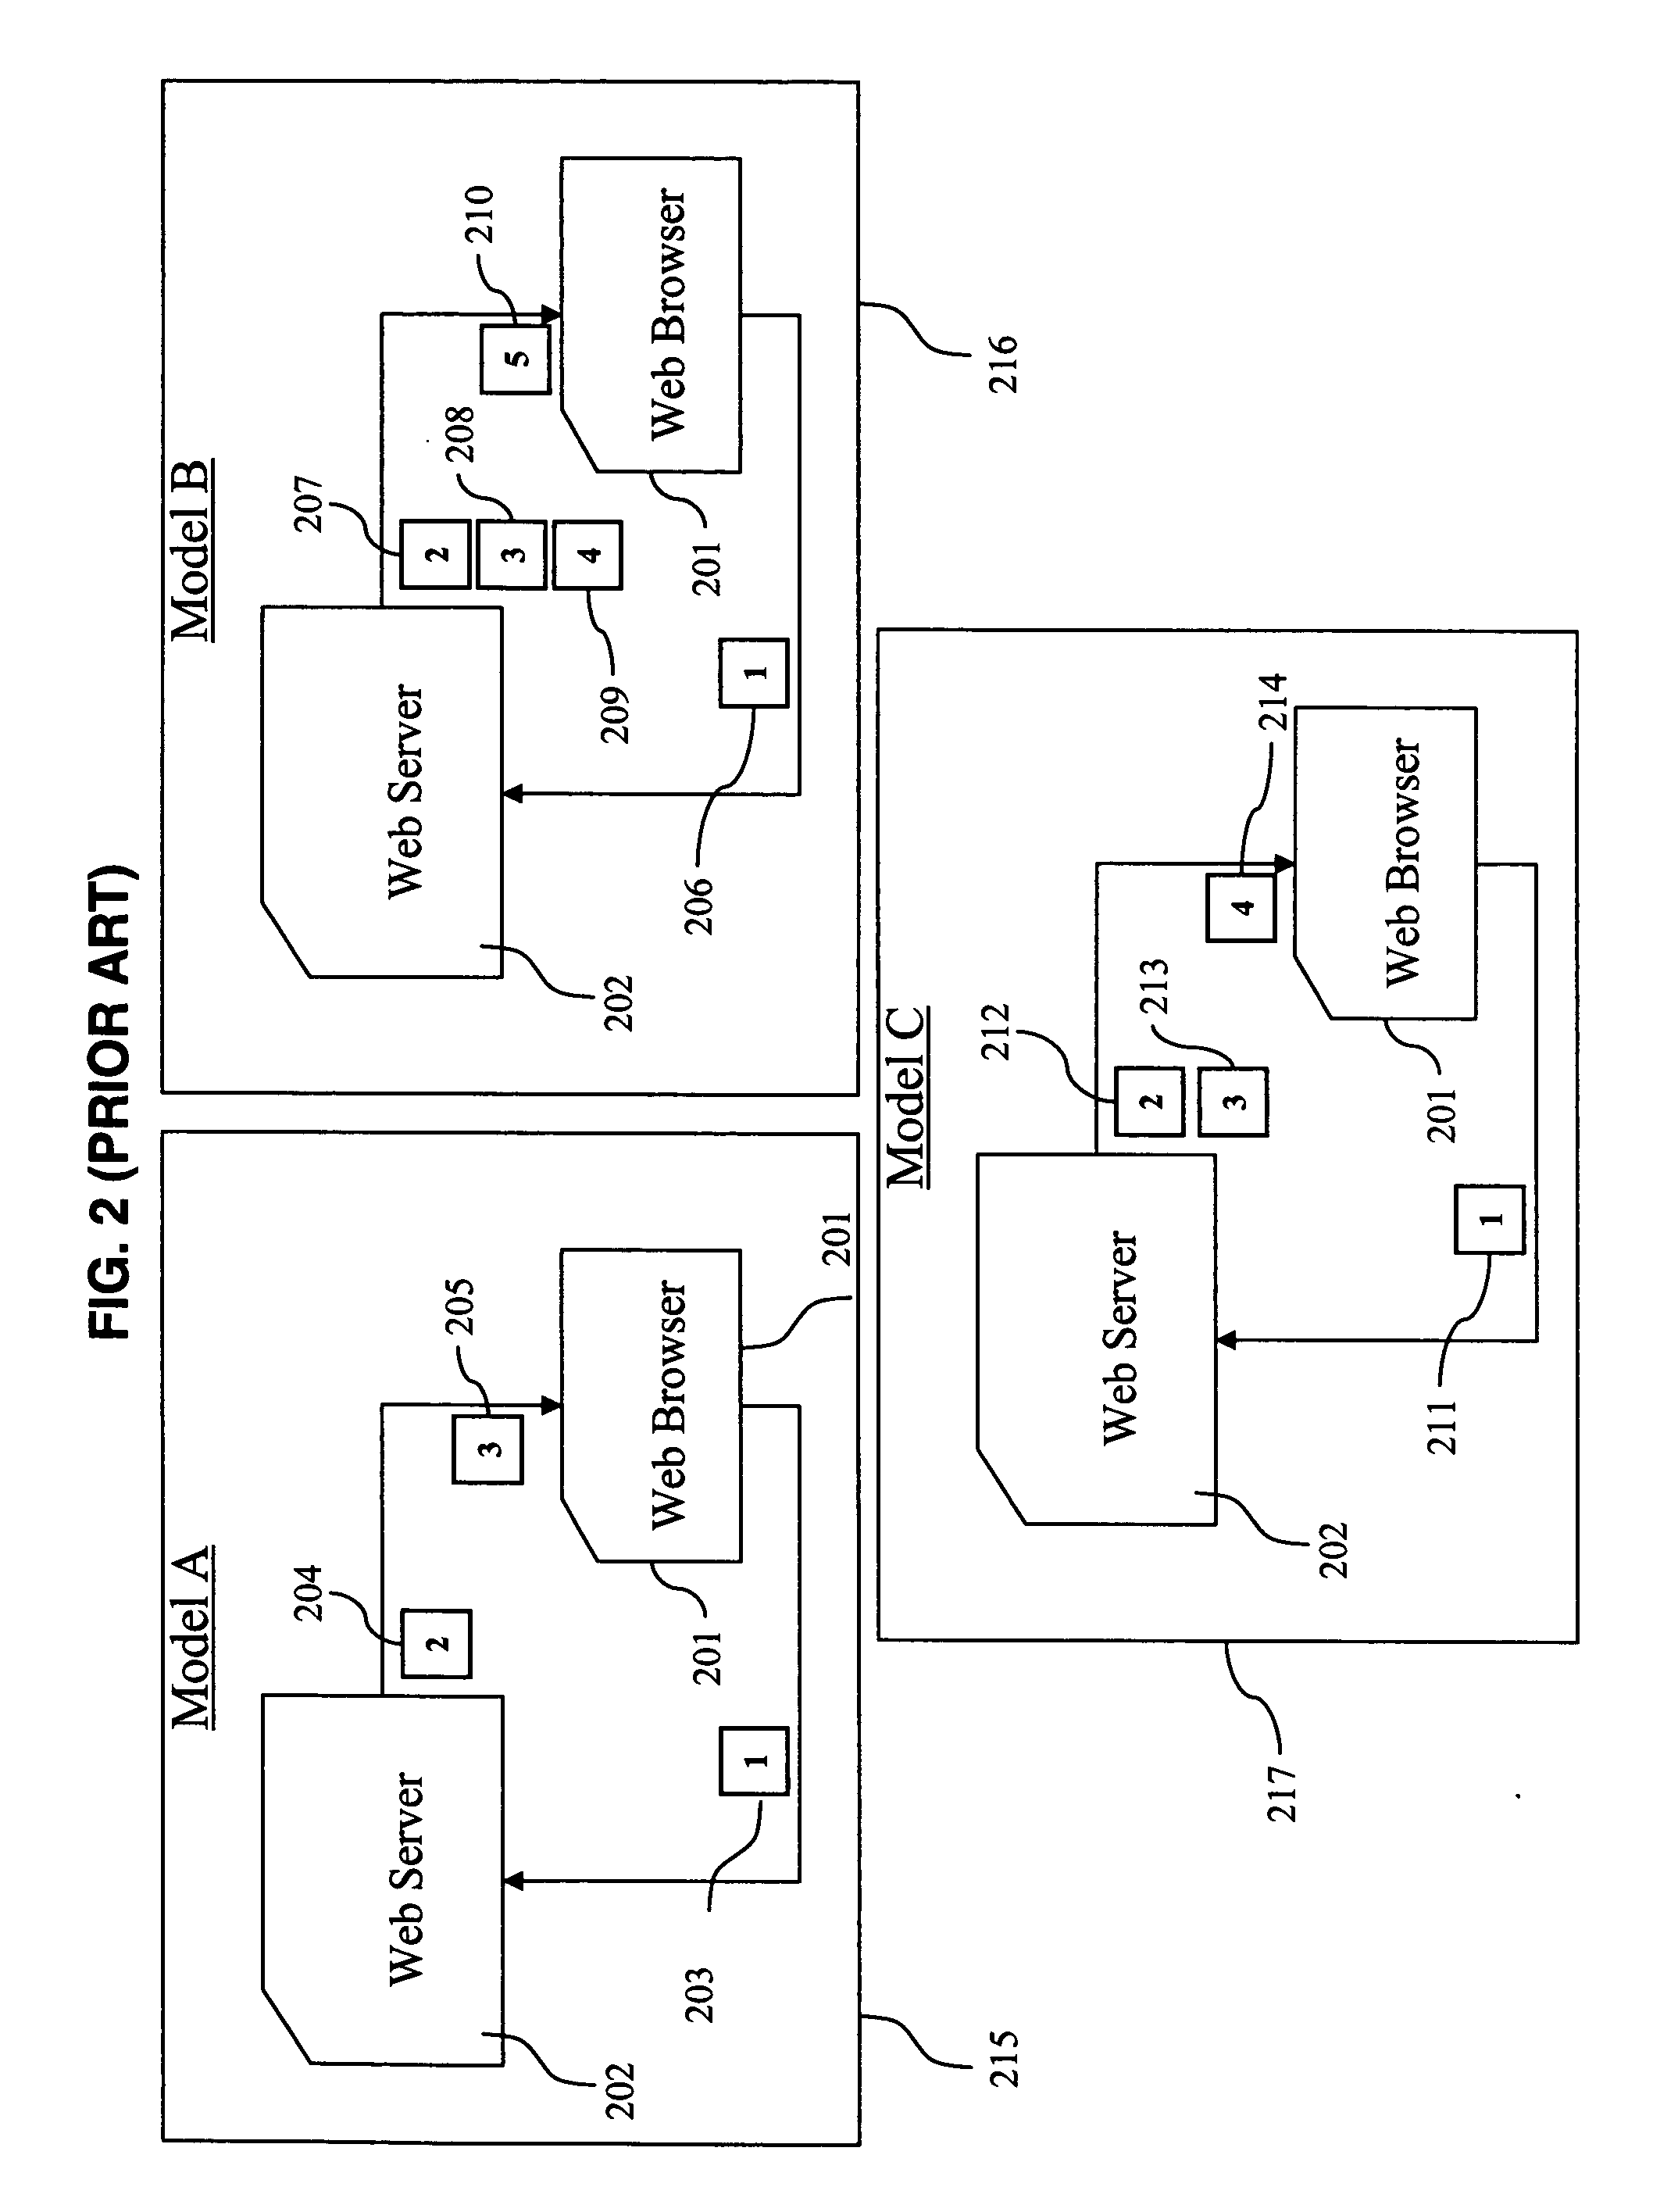 Method of providing a web page with inserted content